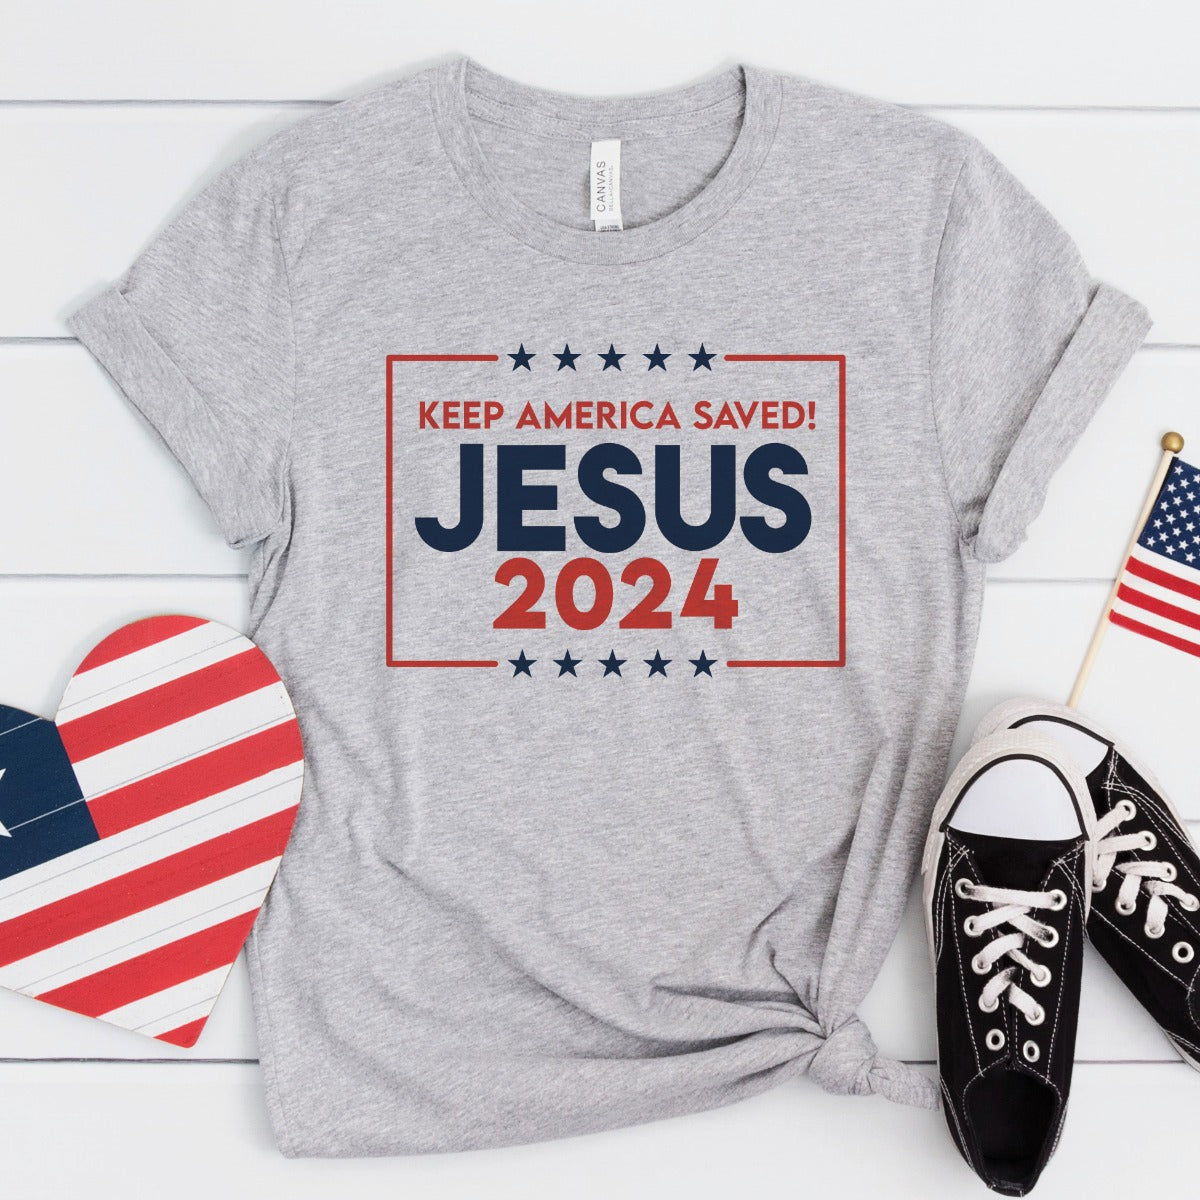 Athletic Heather Gray Patriotic President election vote unisex Christian t-shirt with "Jesus 2024 - Keep America Saved" and stars printed in bold red, white, and blue fonts, made in the USA, made for men and women God & Country Patriots